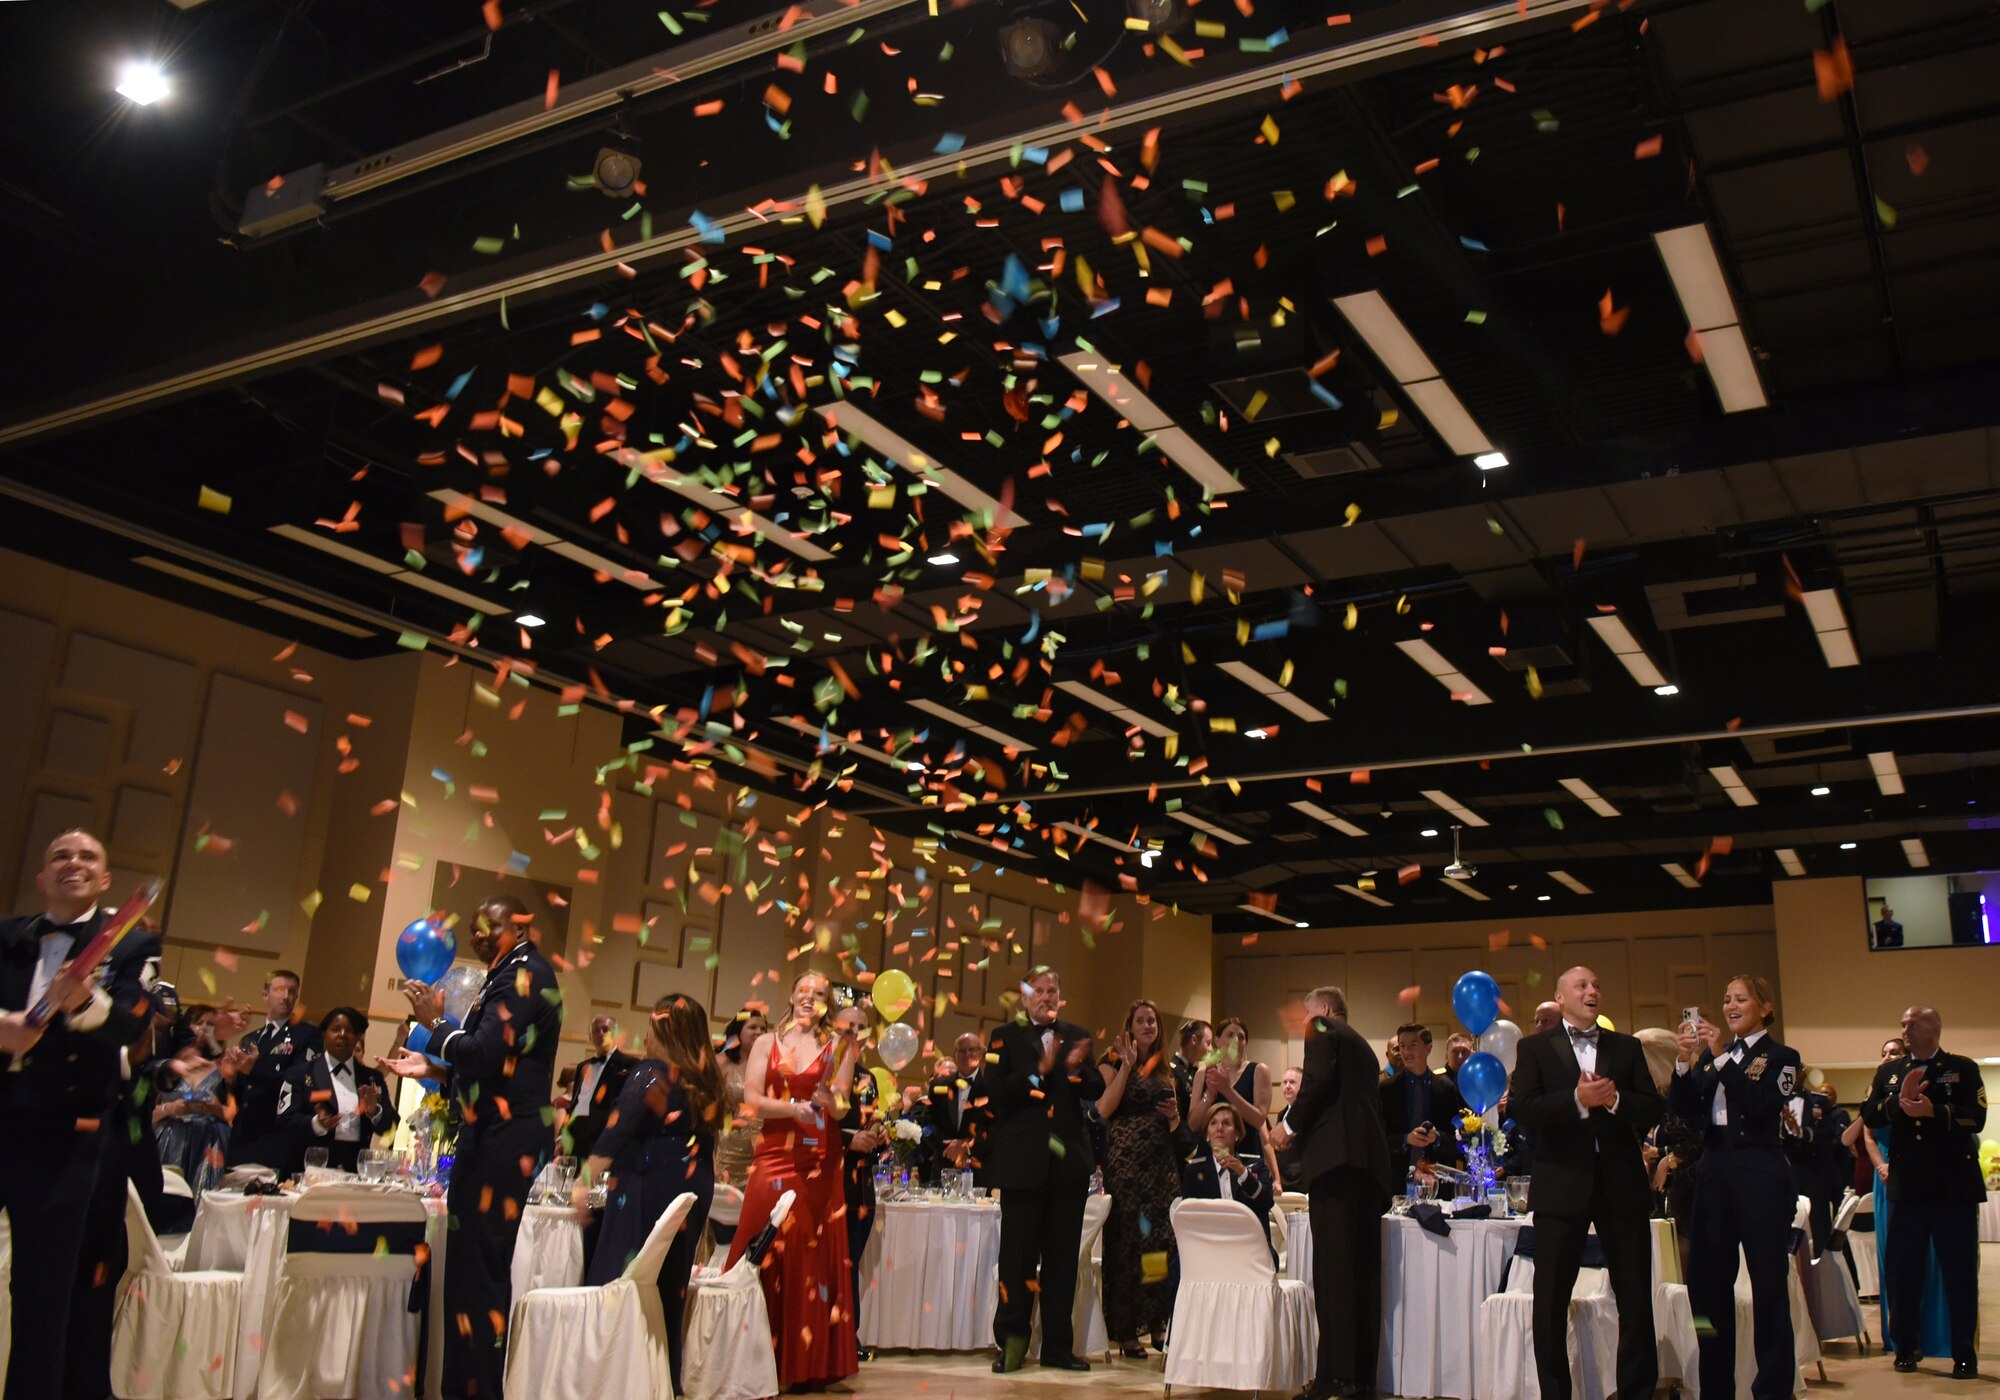 Members assigned to the 17th Training Wing celebrate with confetti at the annual Air Force Ball, at the McNease Convention Center, in San Angelo, Texas, Sept. 17, 2022. The ball recognized the Air Force’s momentous 75th anniversary. (U.S Air Force Photo by Senior Airman Abbey Rieves)